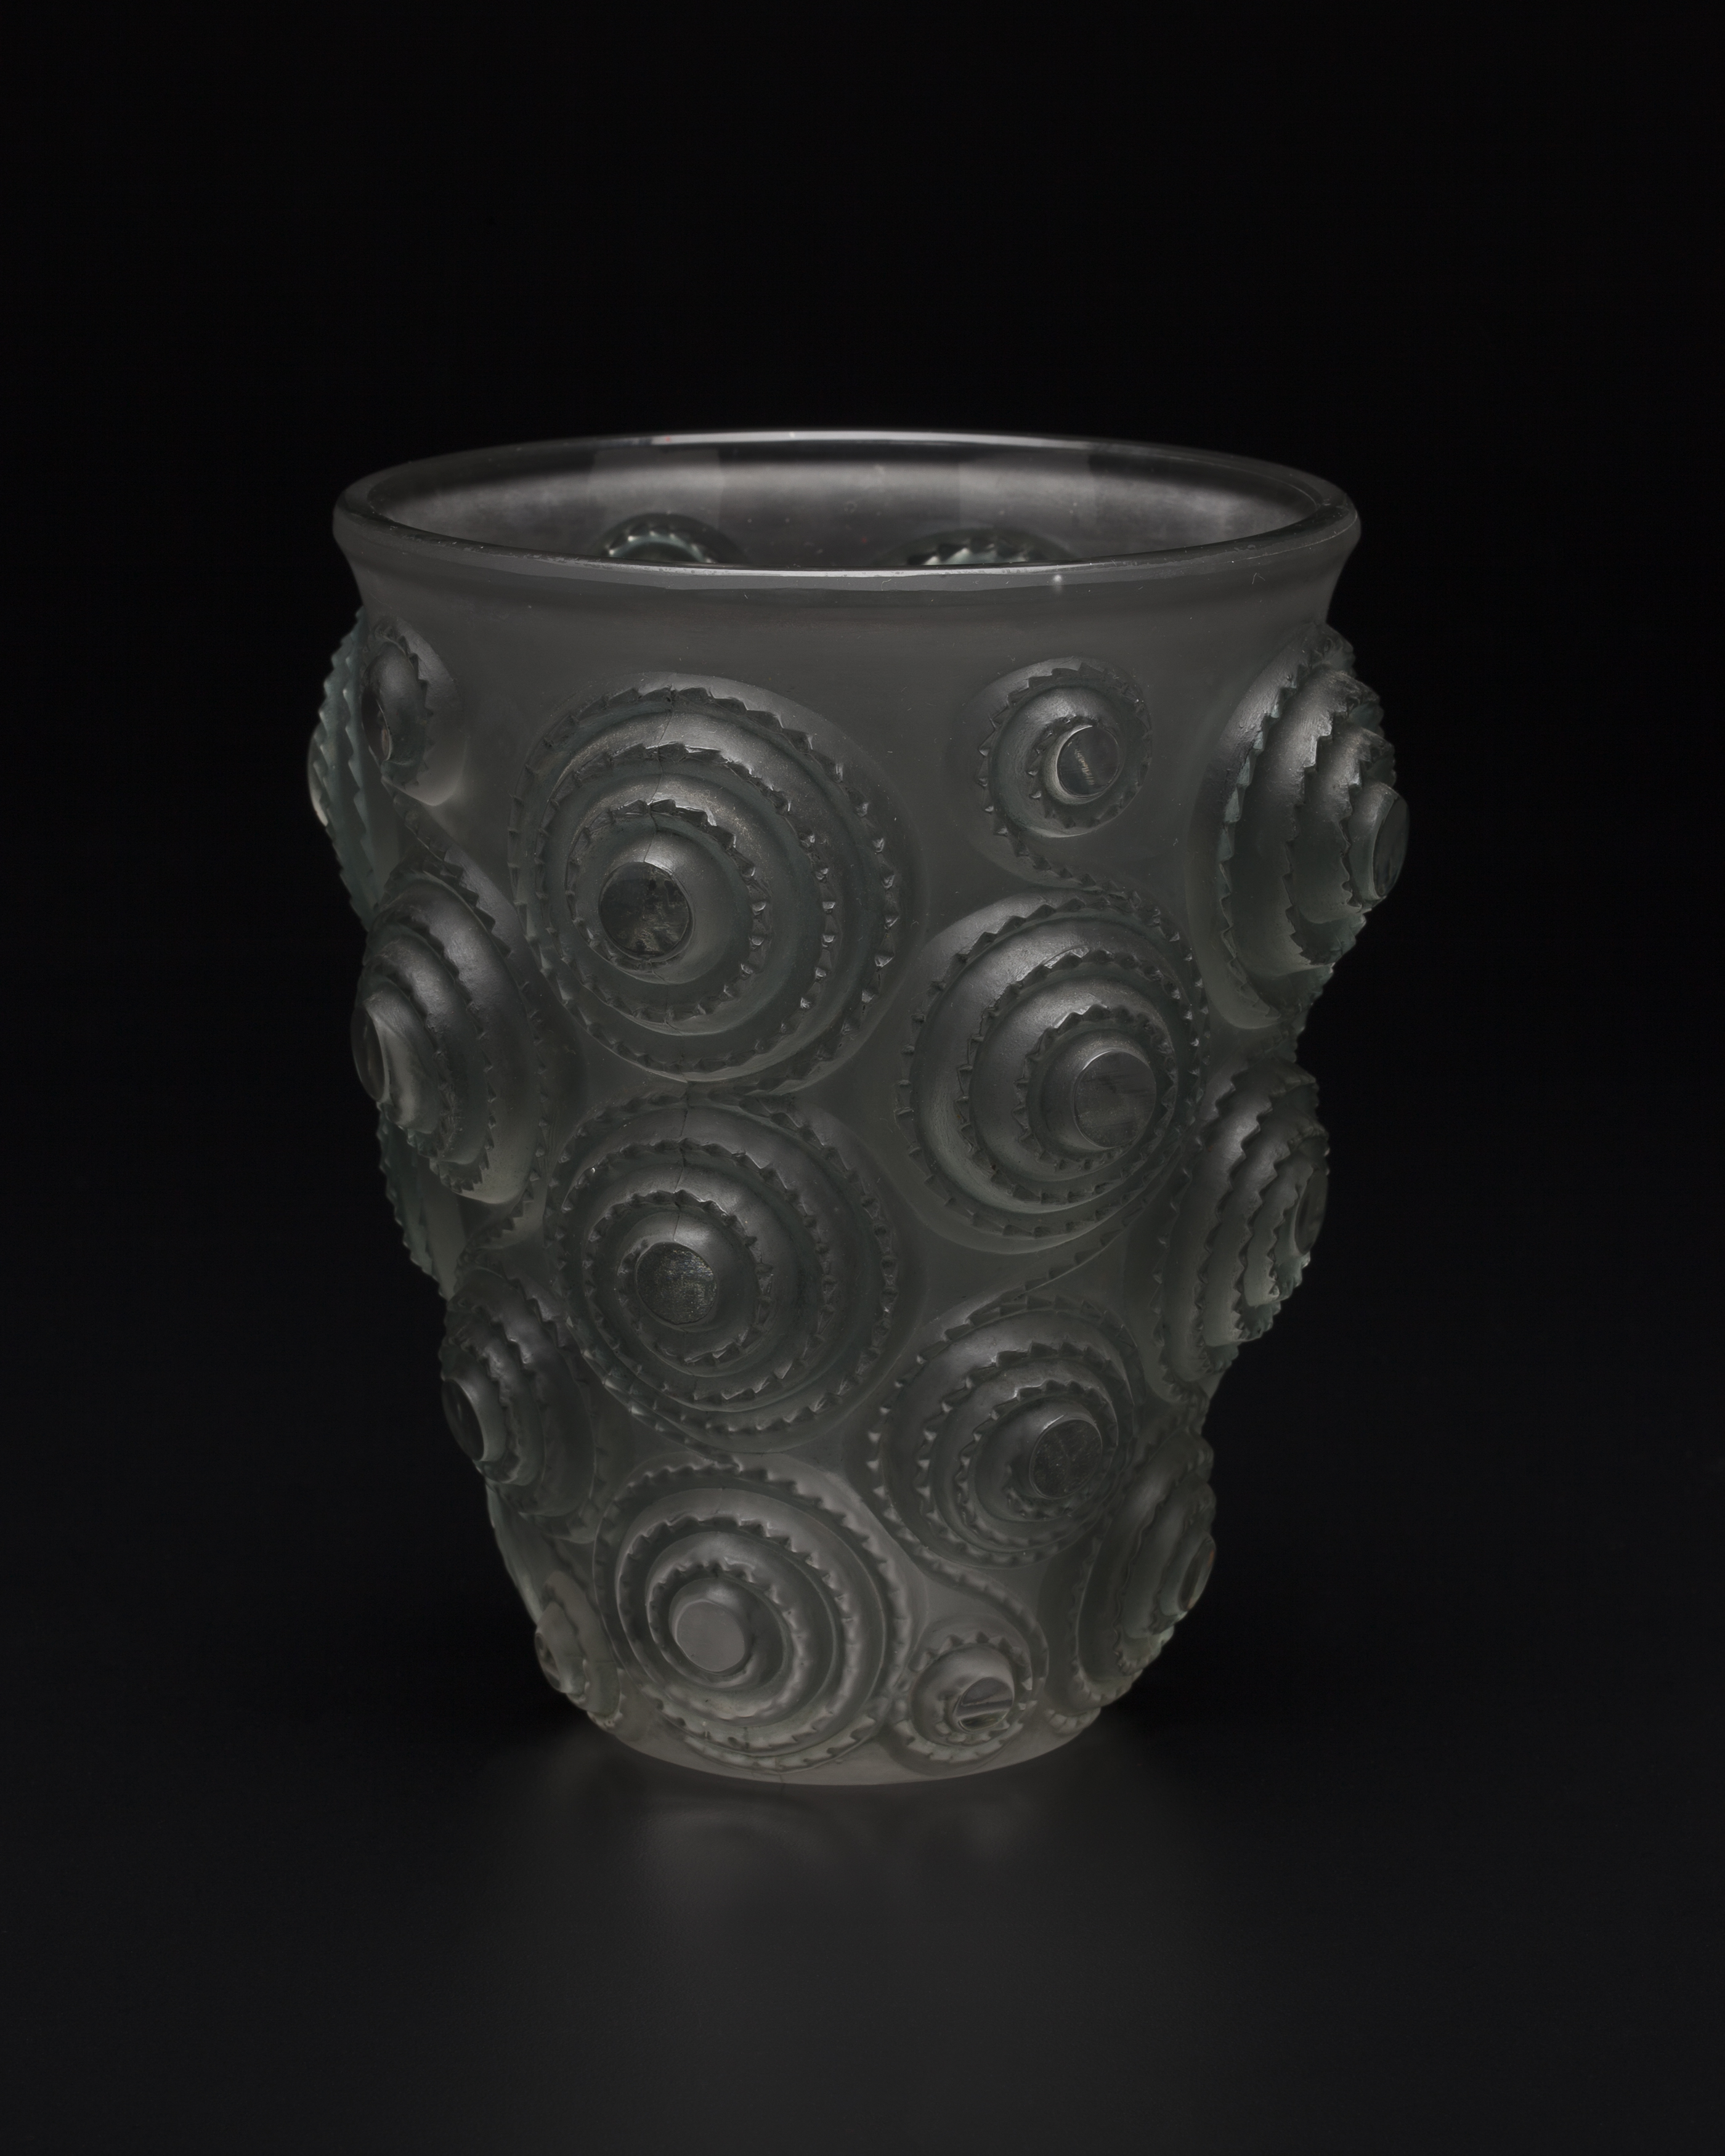 A heavy, cylindrical vase in grey glass with frosted finish, tapering towards the base from a wider rim. The bold, high-relief surface has alternating vertical rows of interlinked notched spiral-shaped forms. 